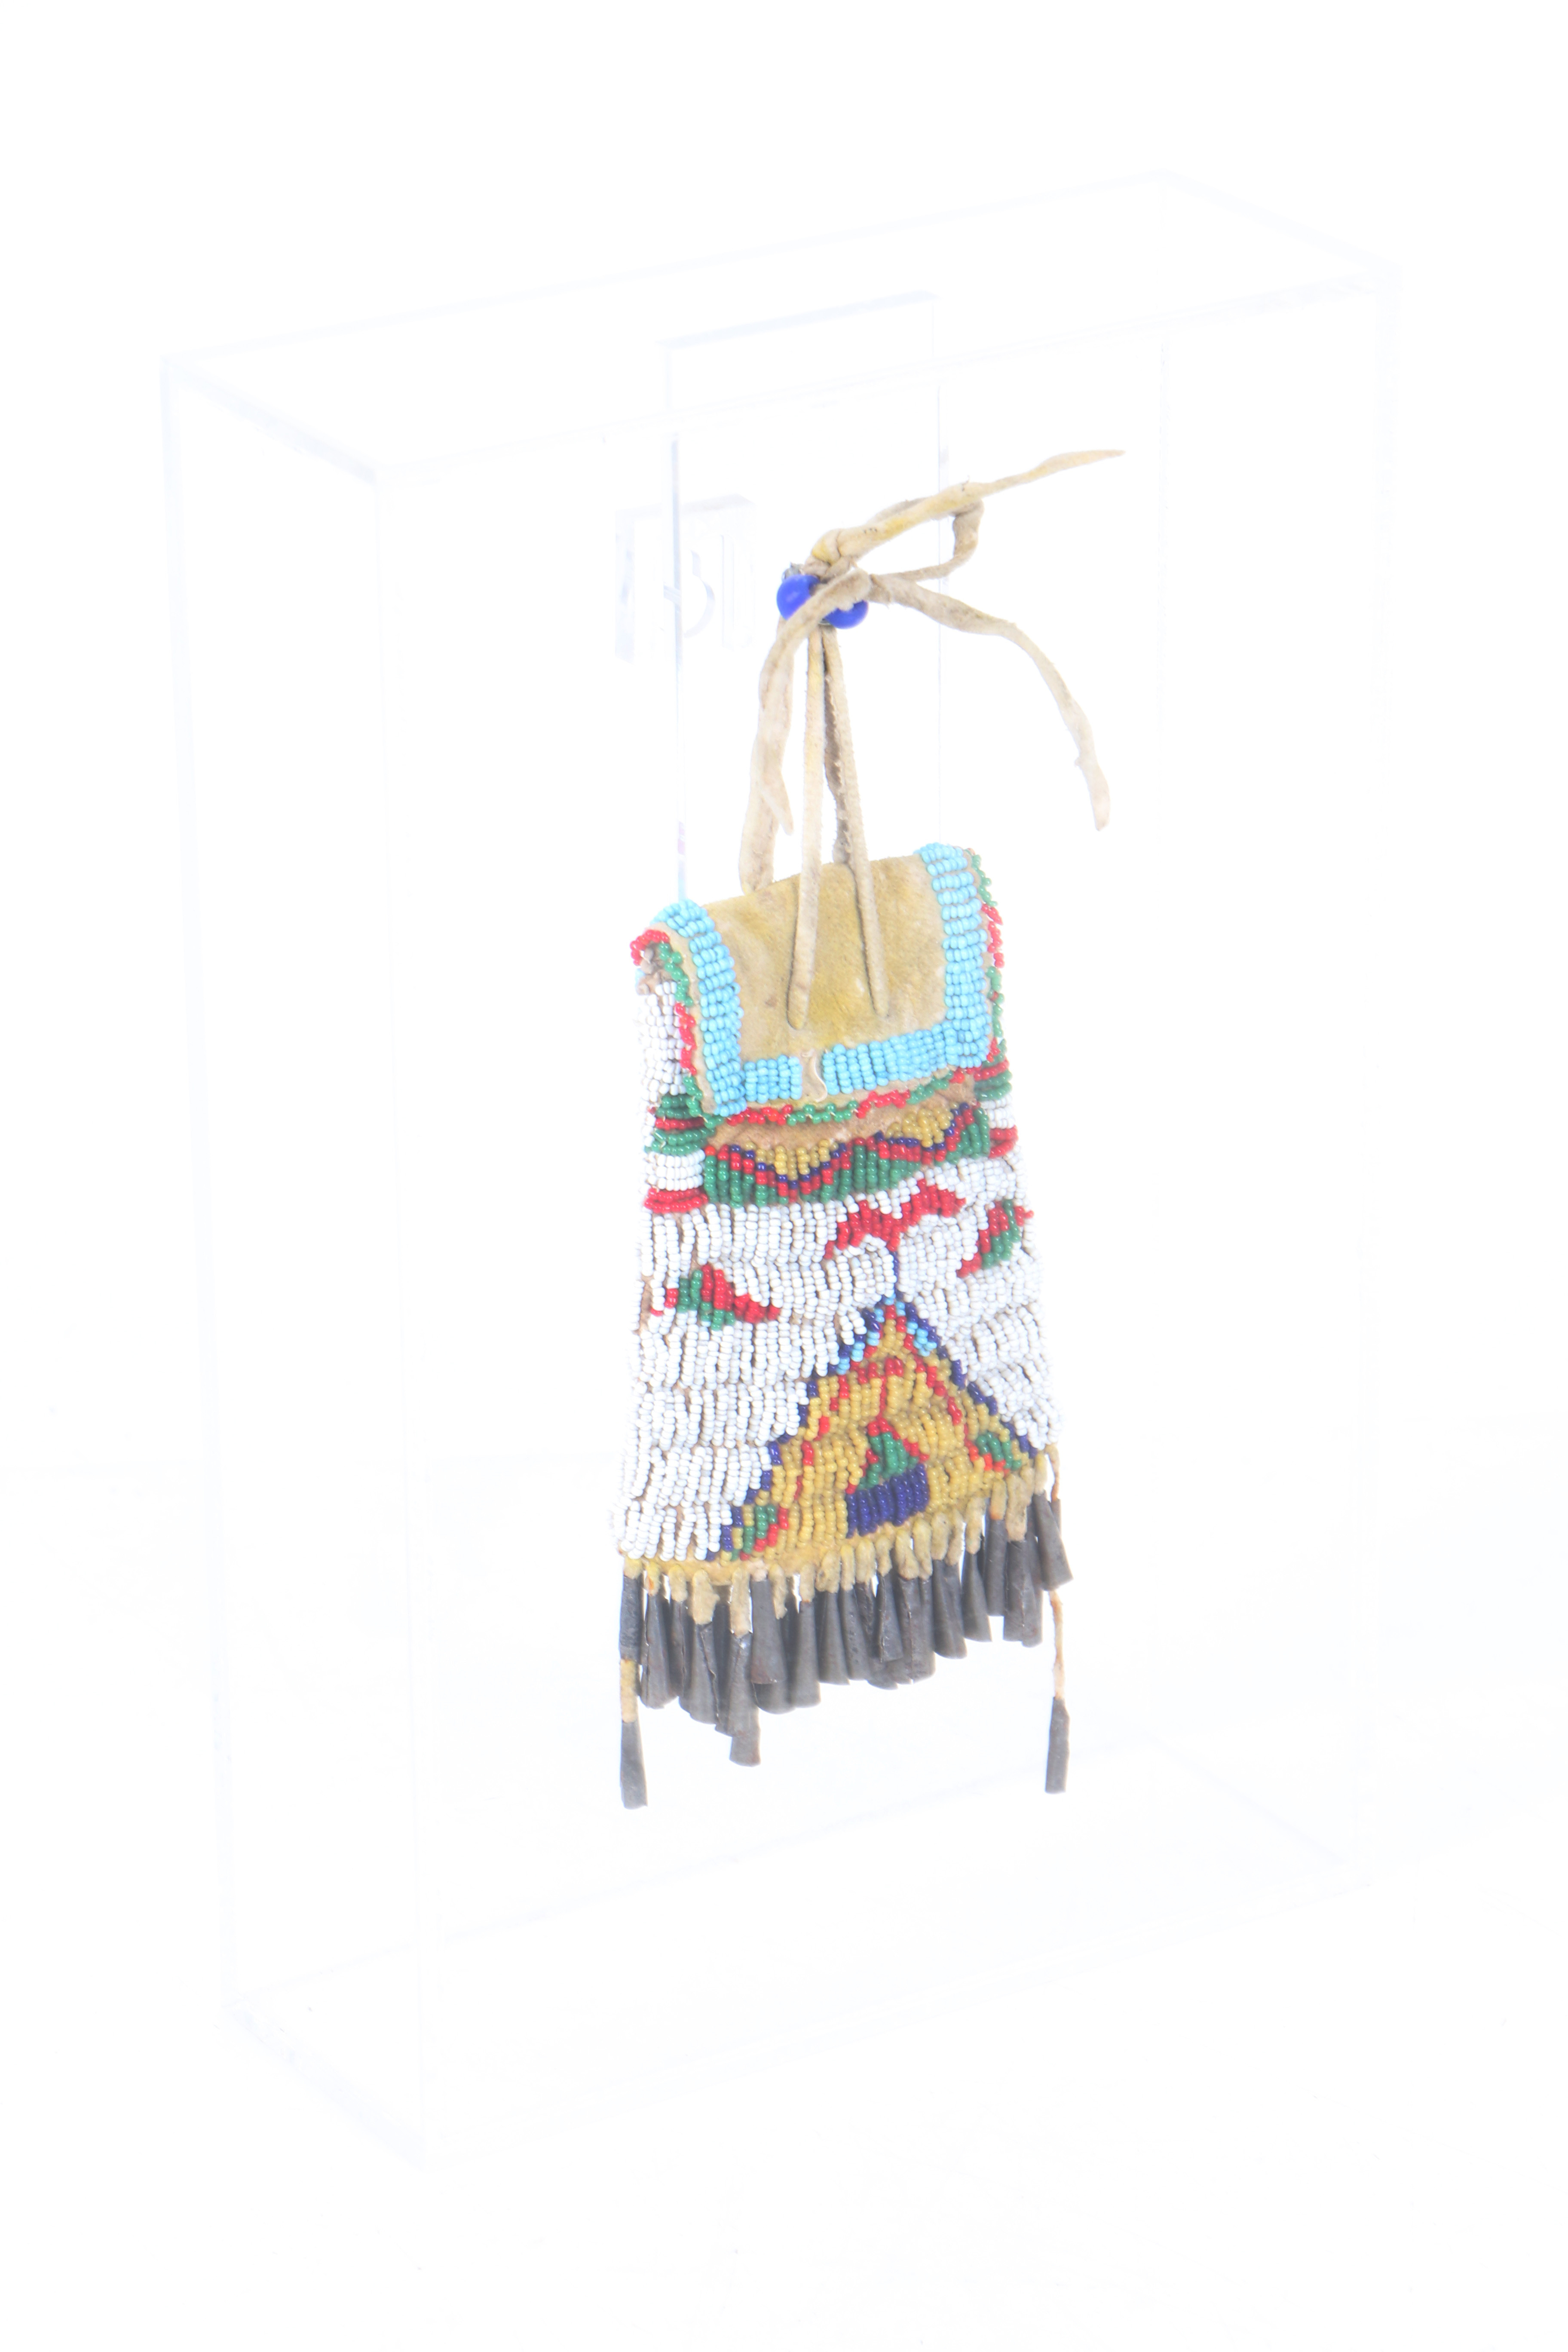 A LAKOTA SIOUX NATIVE AMERICAN BEADED STRIKE-A-LITE POUCH. - Image 4 of 4